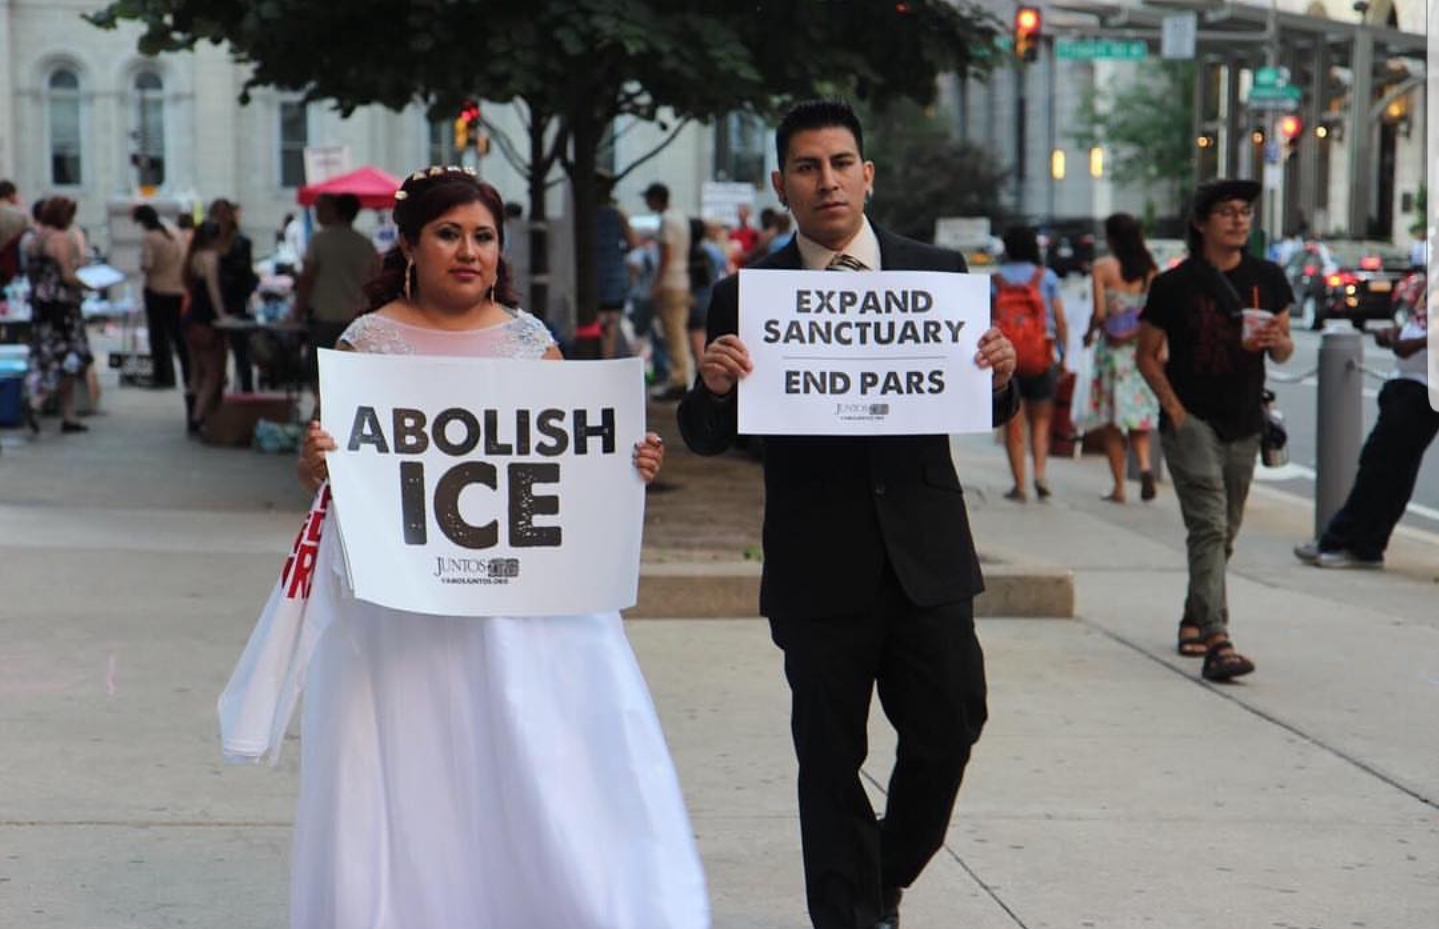 Linda Hernández visited the Abolish ICE encampment on her wedding day, prior to the city's decision to end the PARS contract with ICE. Photo: Courtesy of Juntos
